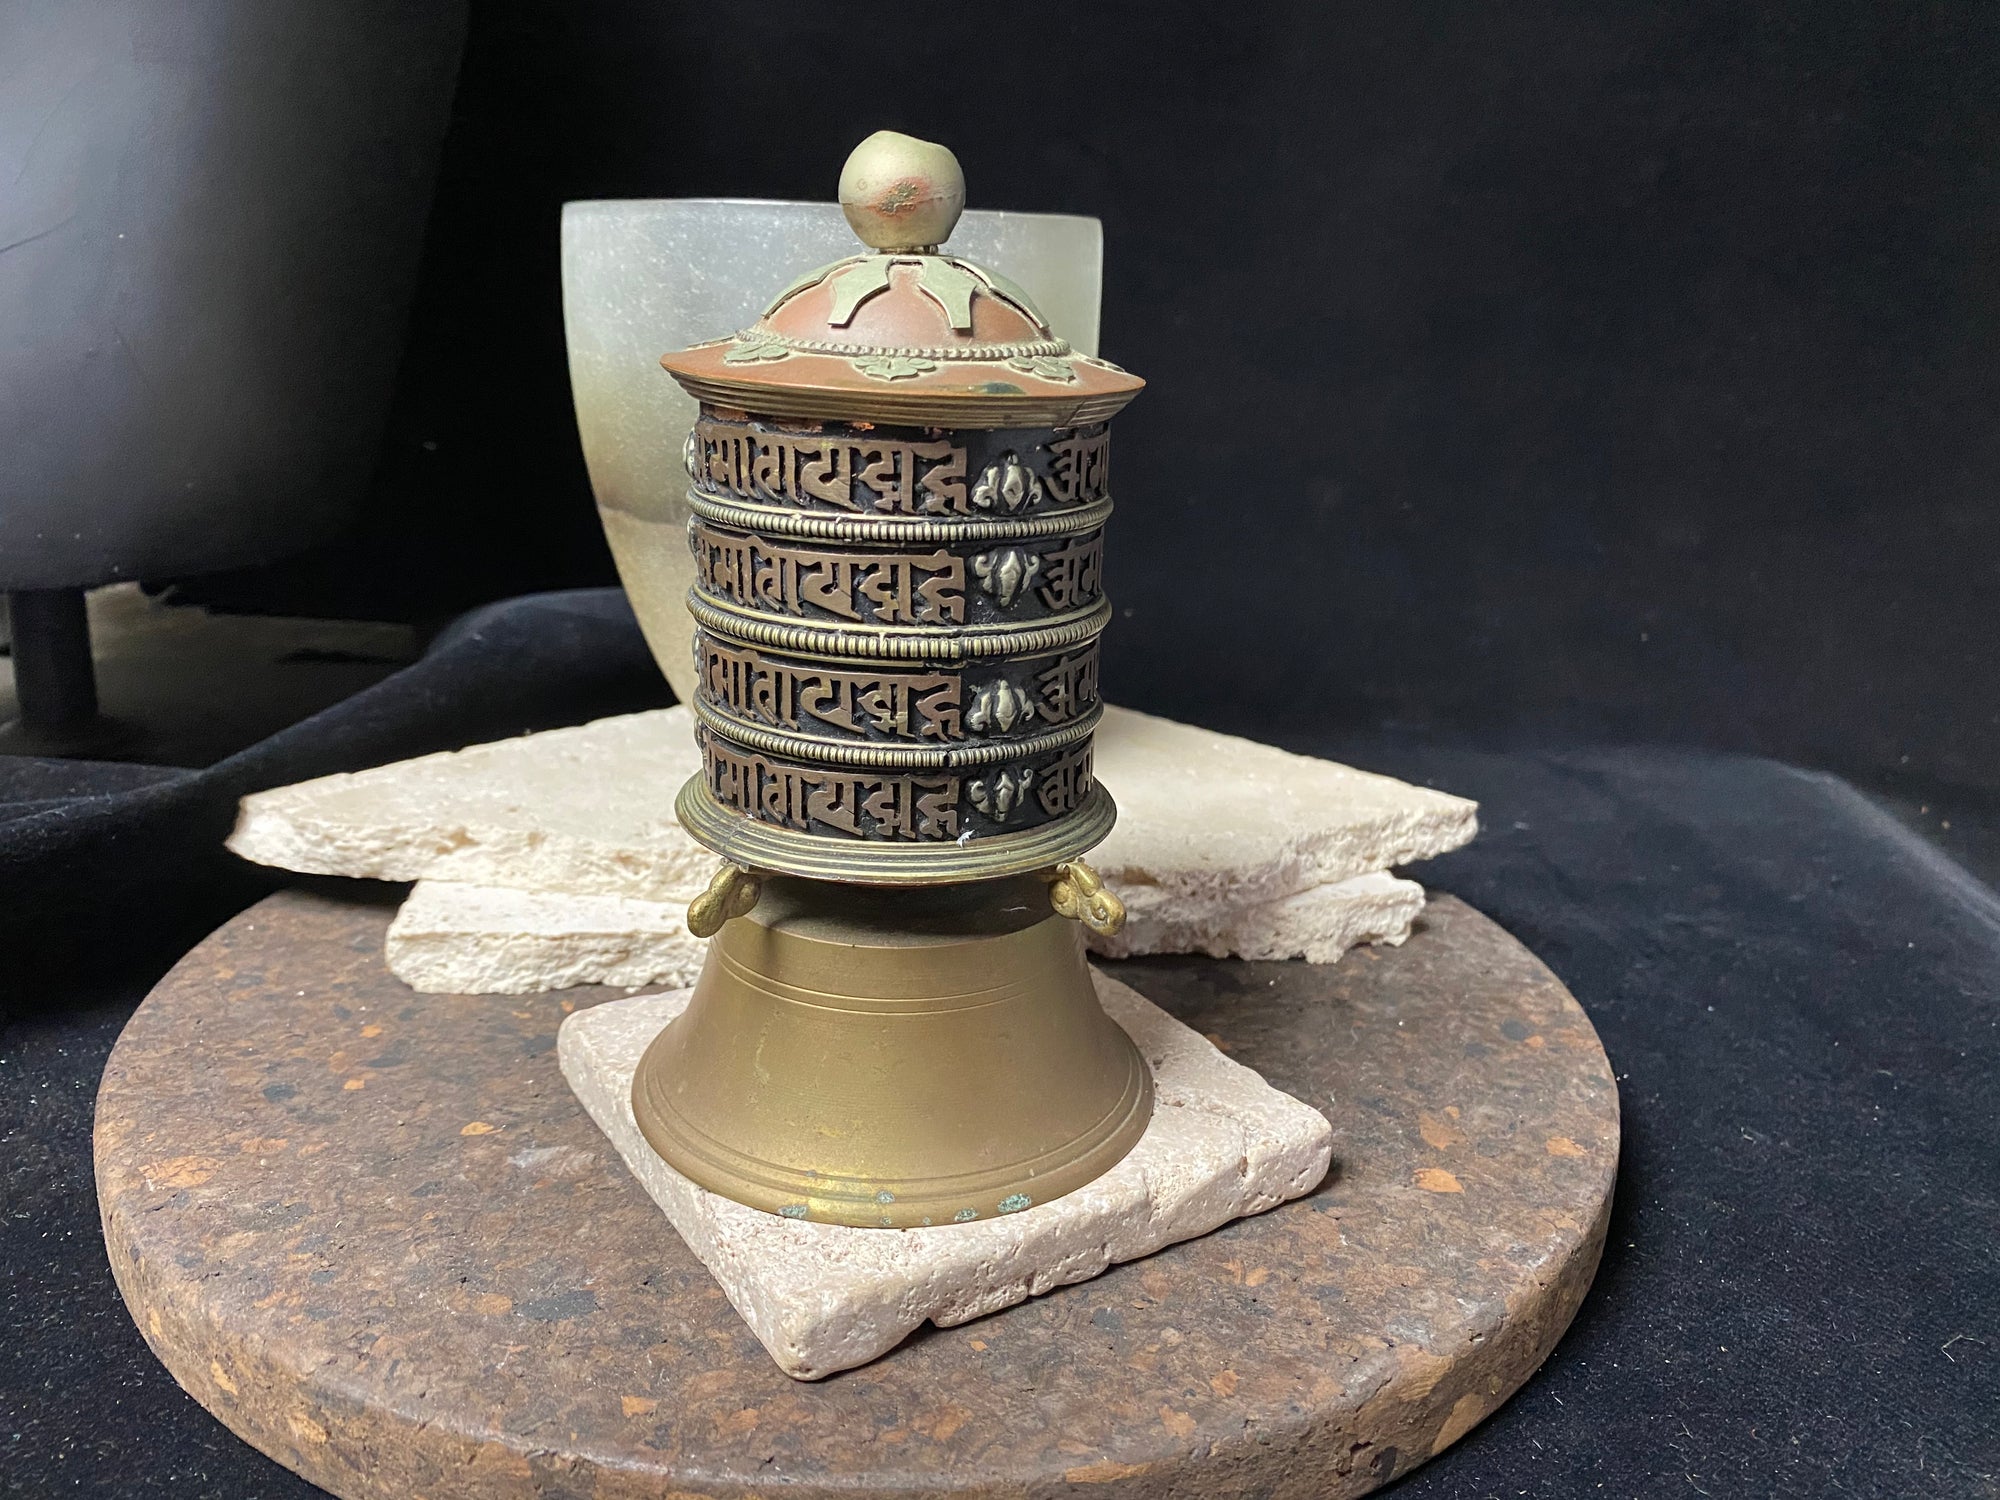 Handmade in Nepal from brass and copper, this standing prayer wheel is beautifully weighted for spinning and contains a scroll on which is printed the mantra "Om Mani Padme Hum", a prayer to the Compassionate Buddha, written many thousand times. 16 cm high